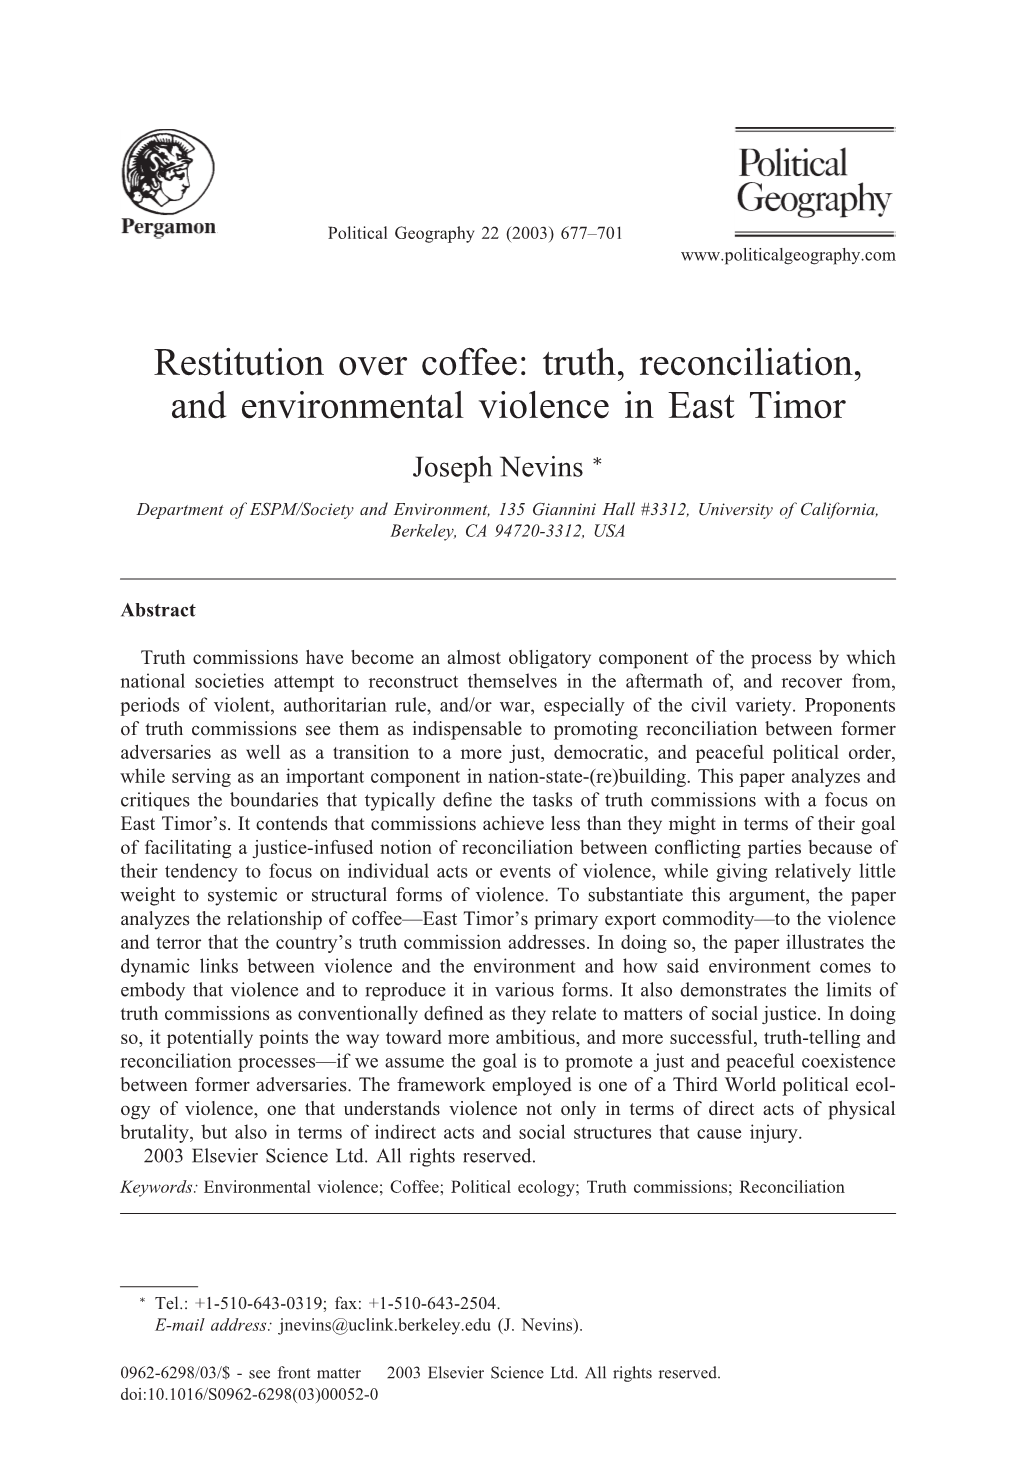 Restitution Over Coffee: Truth, Reconciliation, and Environmental Violence in East Timor